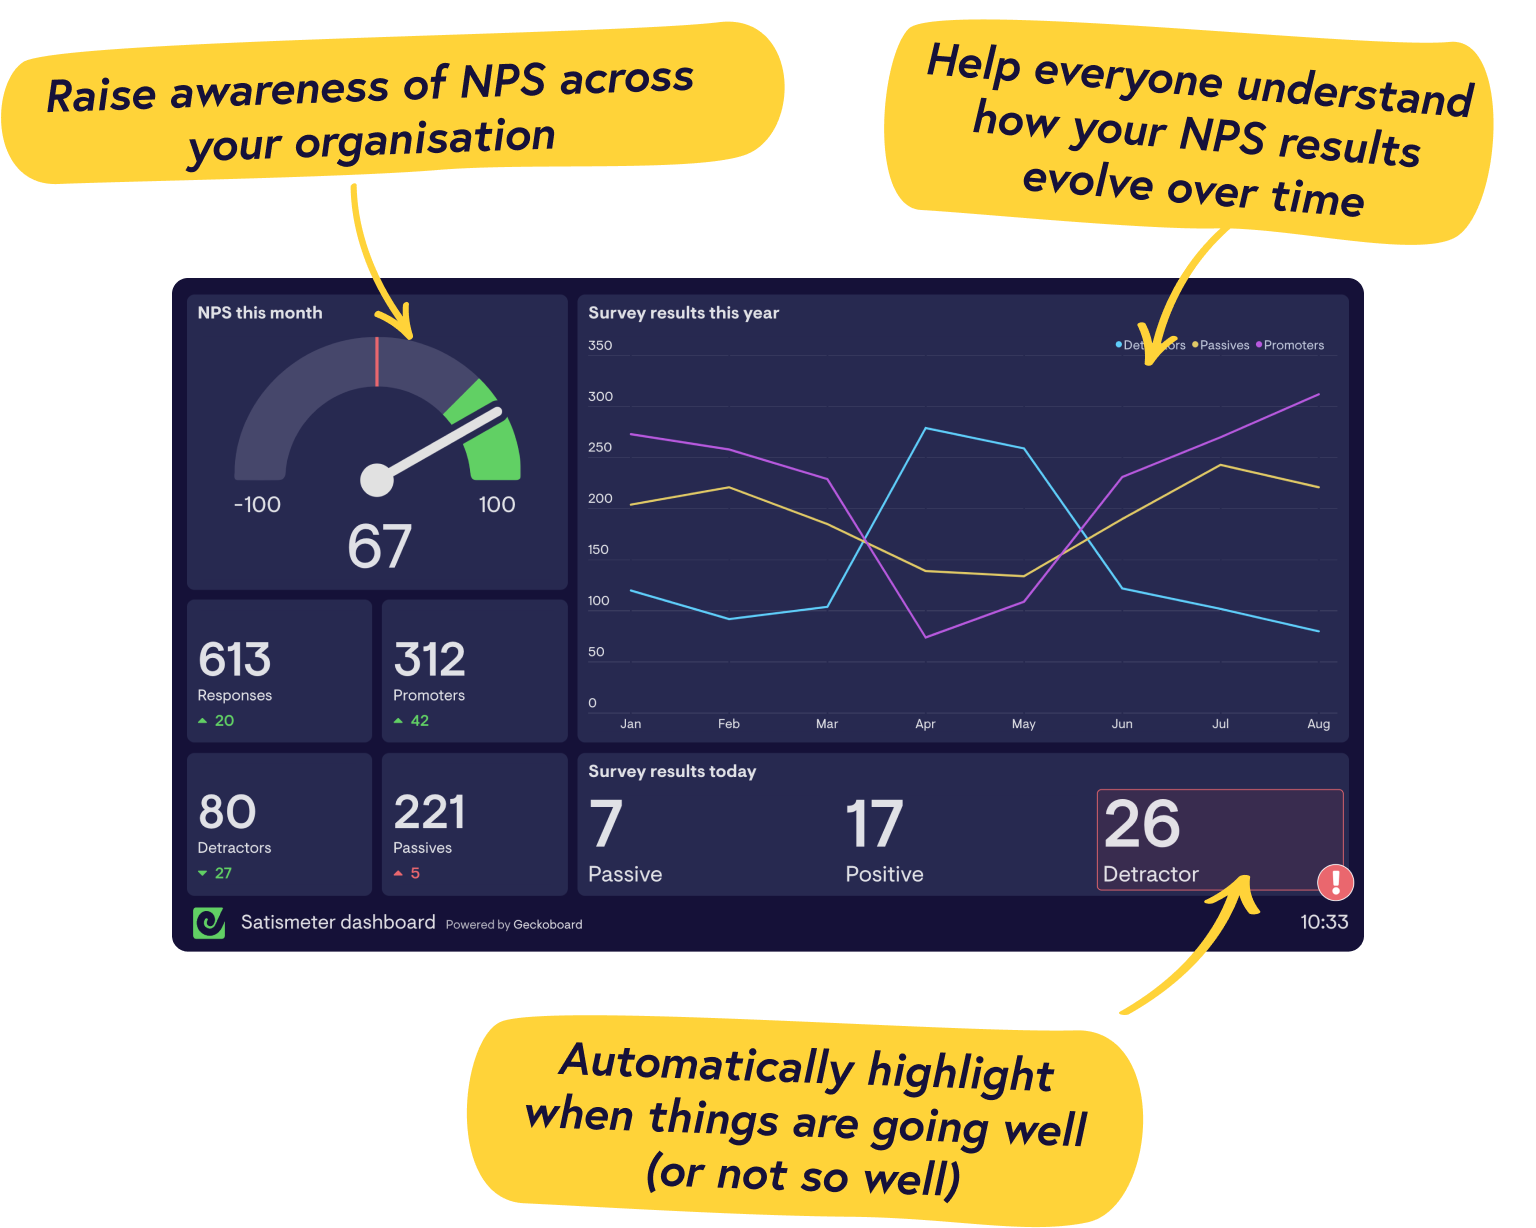 Real-time SatisMeter dashboards from Geckoboard